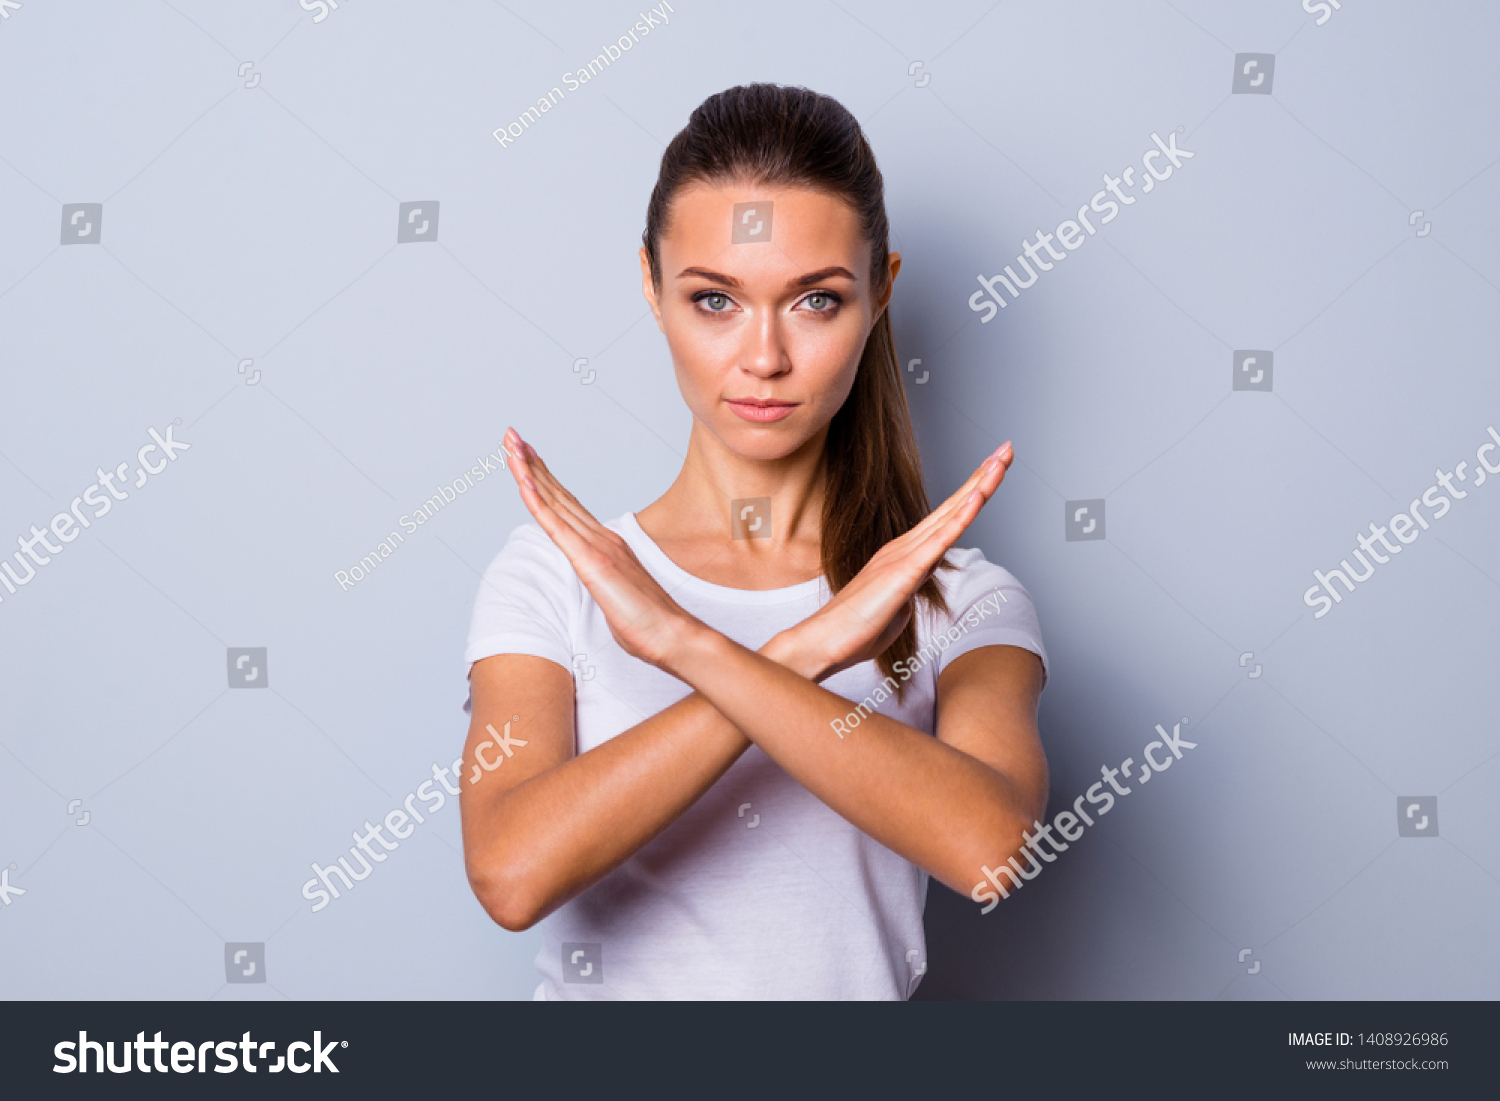 Close up photo amazing beautiful she her lady pretty hairstyle arms hands fingers palms crossed not allow violence stop war make love calling wear casual white t-shirt clothes isolated grey background #1408926986